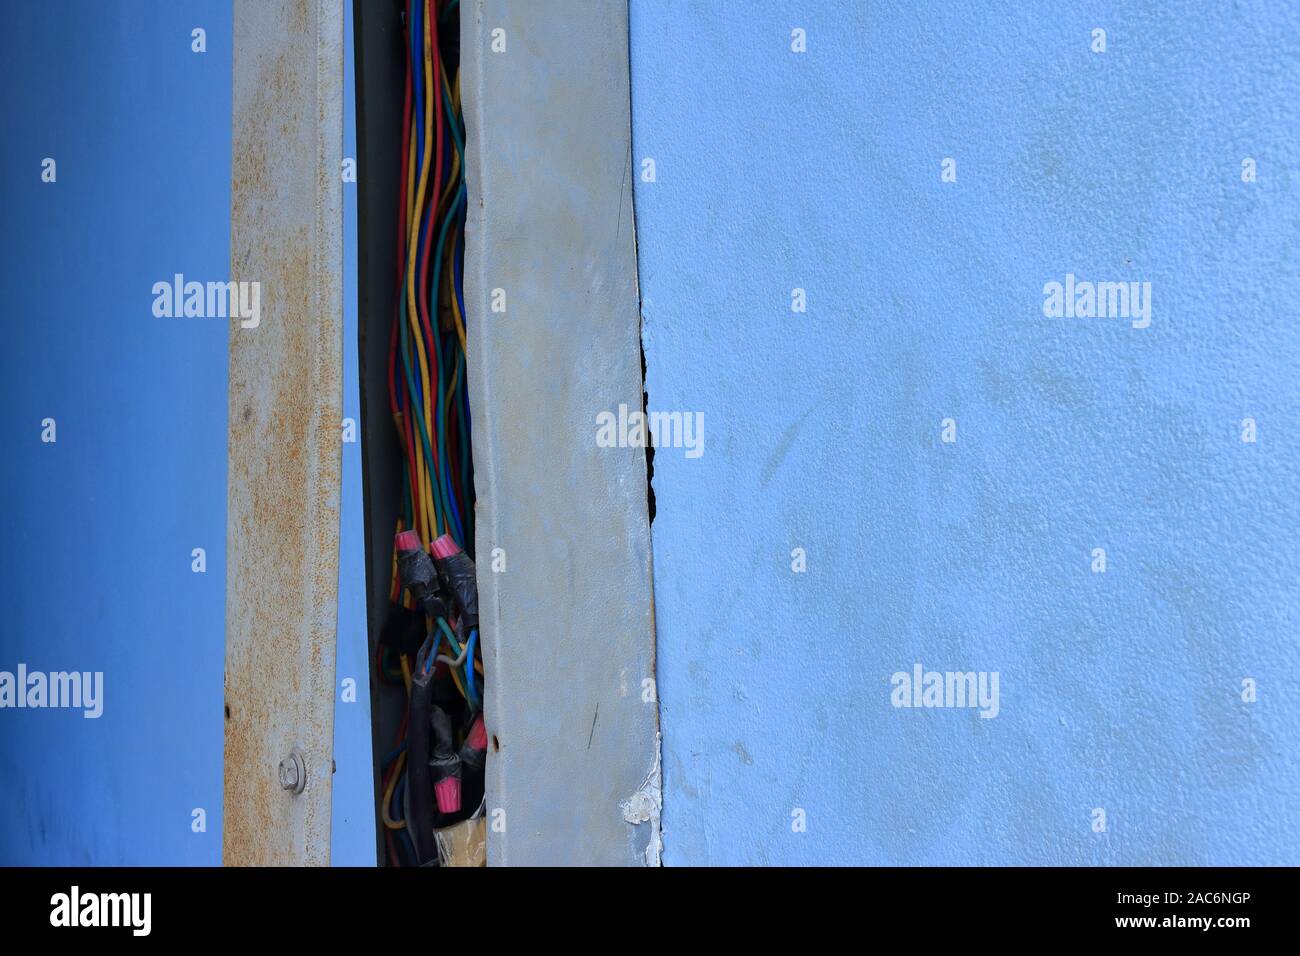 Closeup exposed power lines in broken wireway installed on dirty blue wall of a building Stock Photo